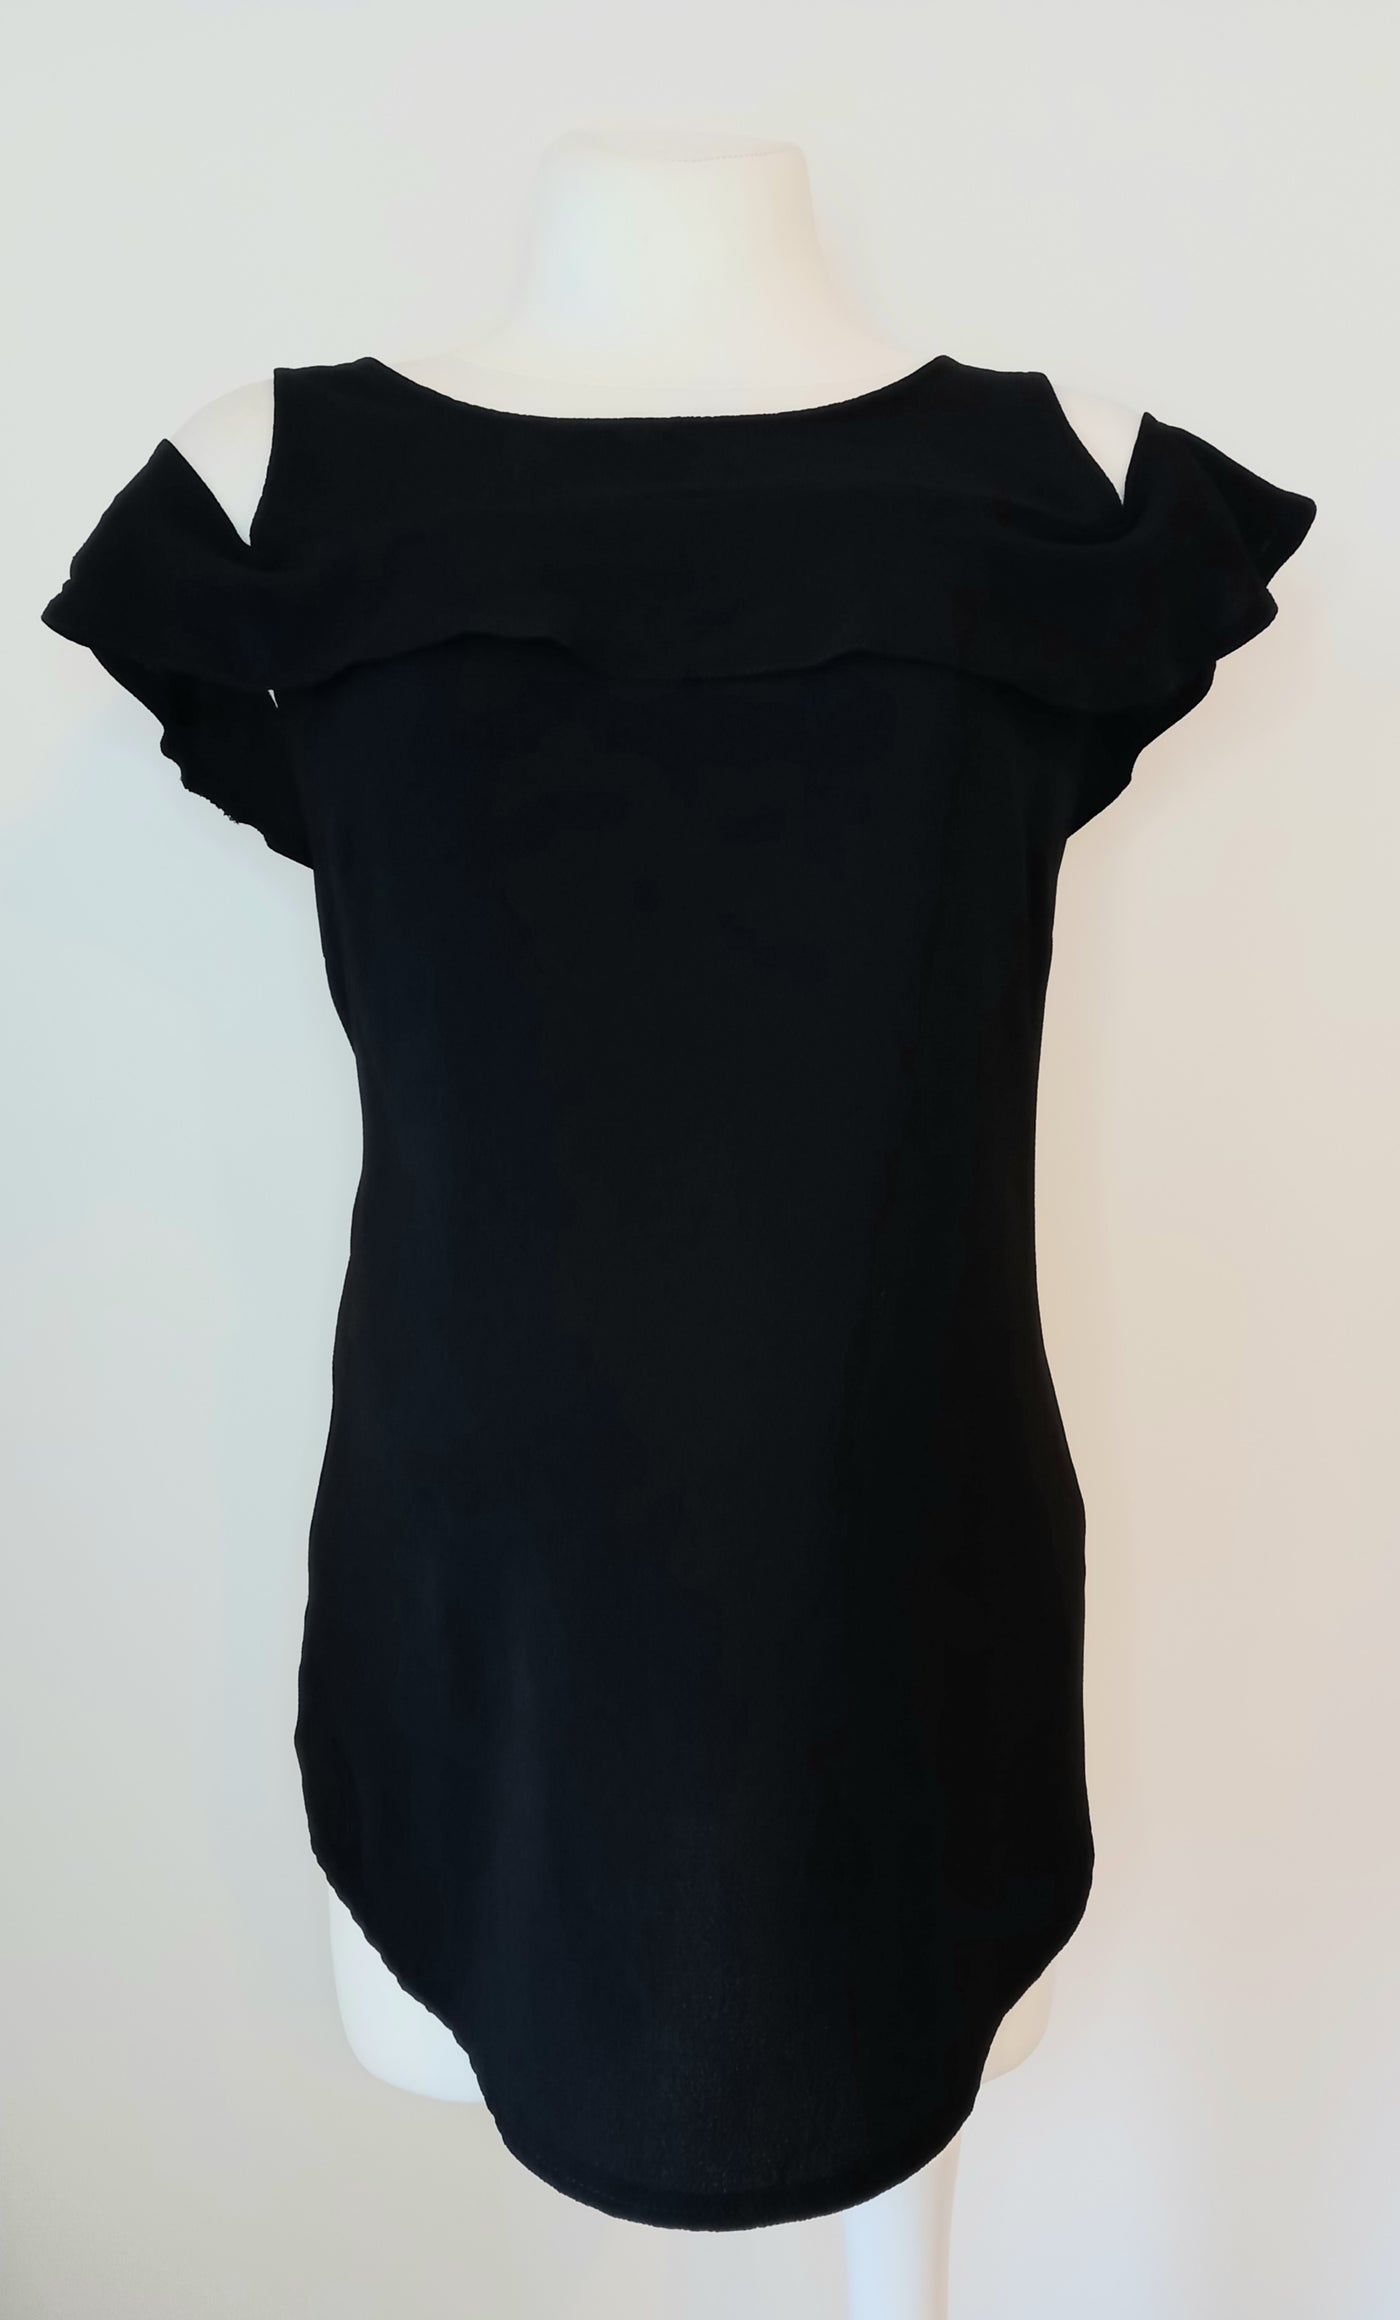 New Look Maternity Black Cold Shoulder Frill Top - Size 10